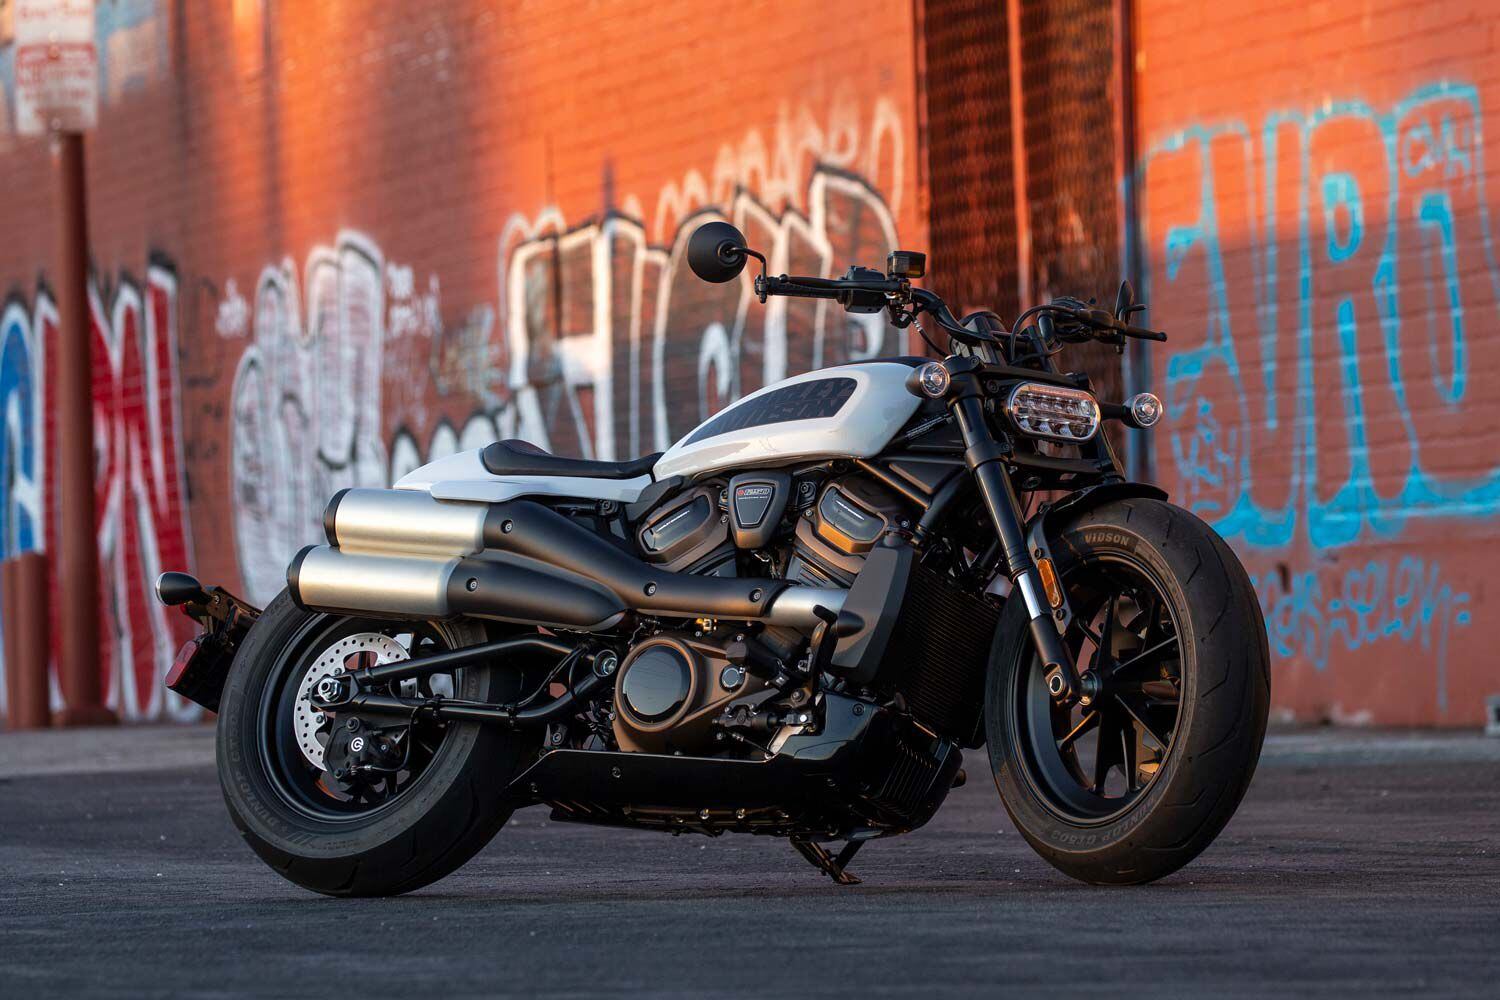 2021 Harley Davidson Sportster S First Ride Review Cycle World